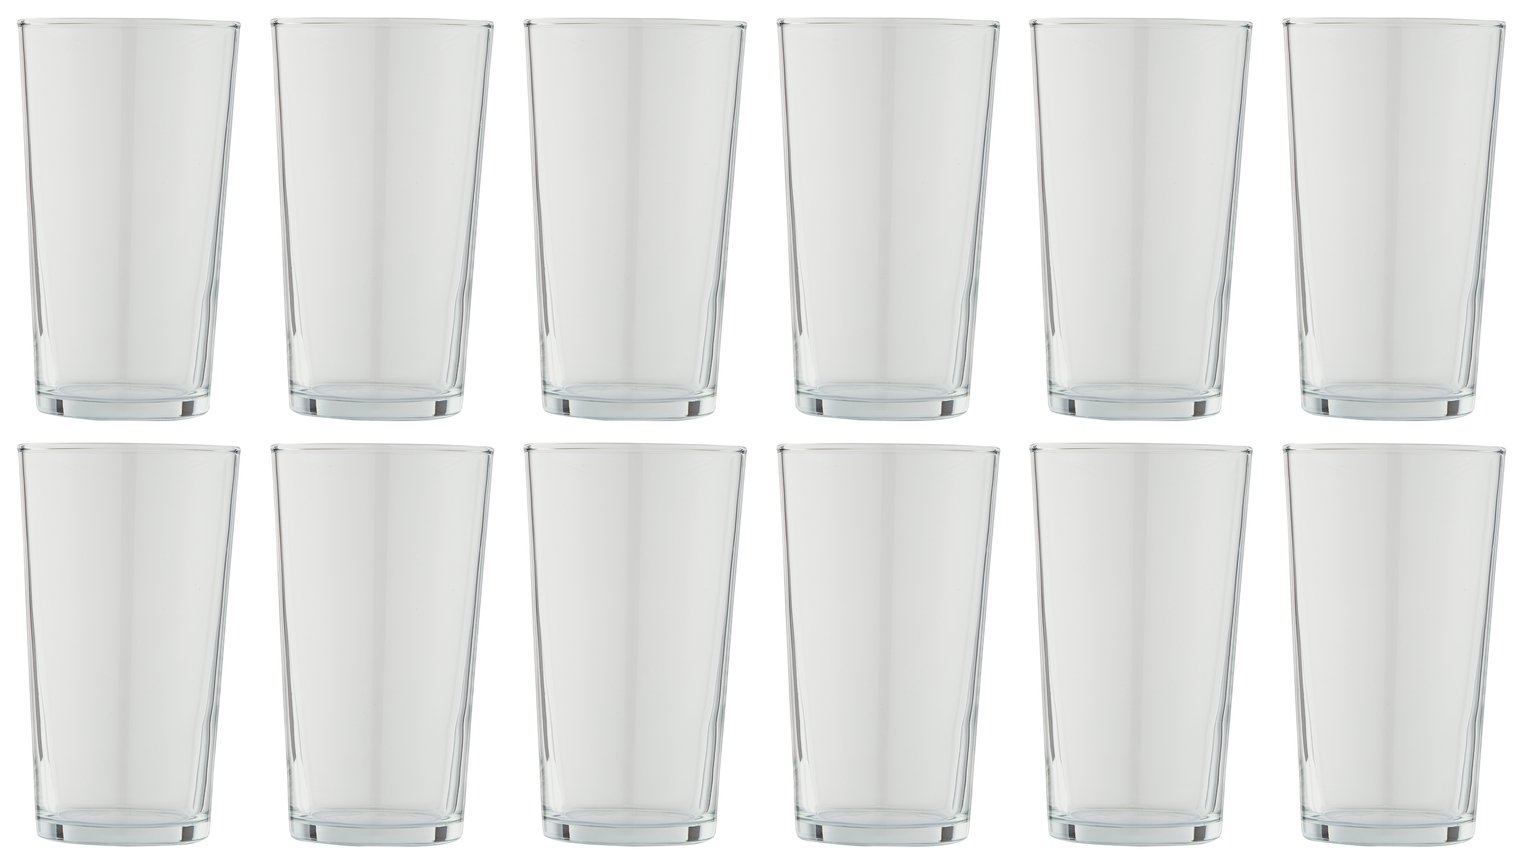 Argos Home Set of 12 Basic Beer Glasses review